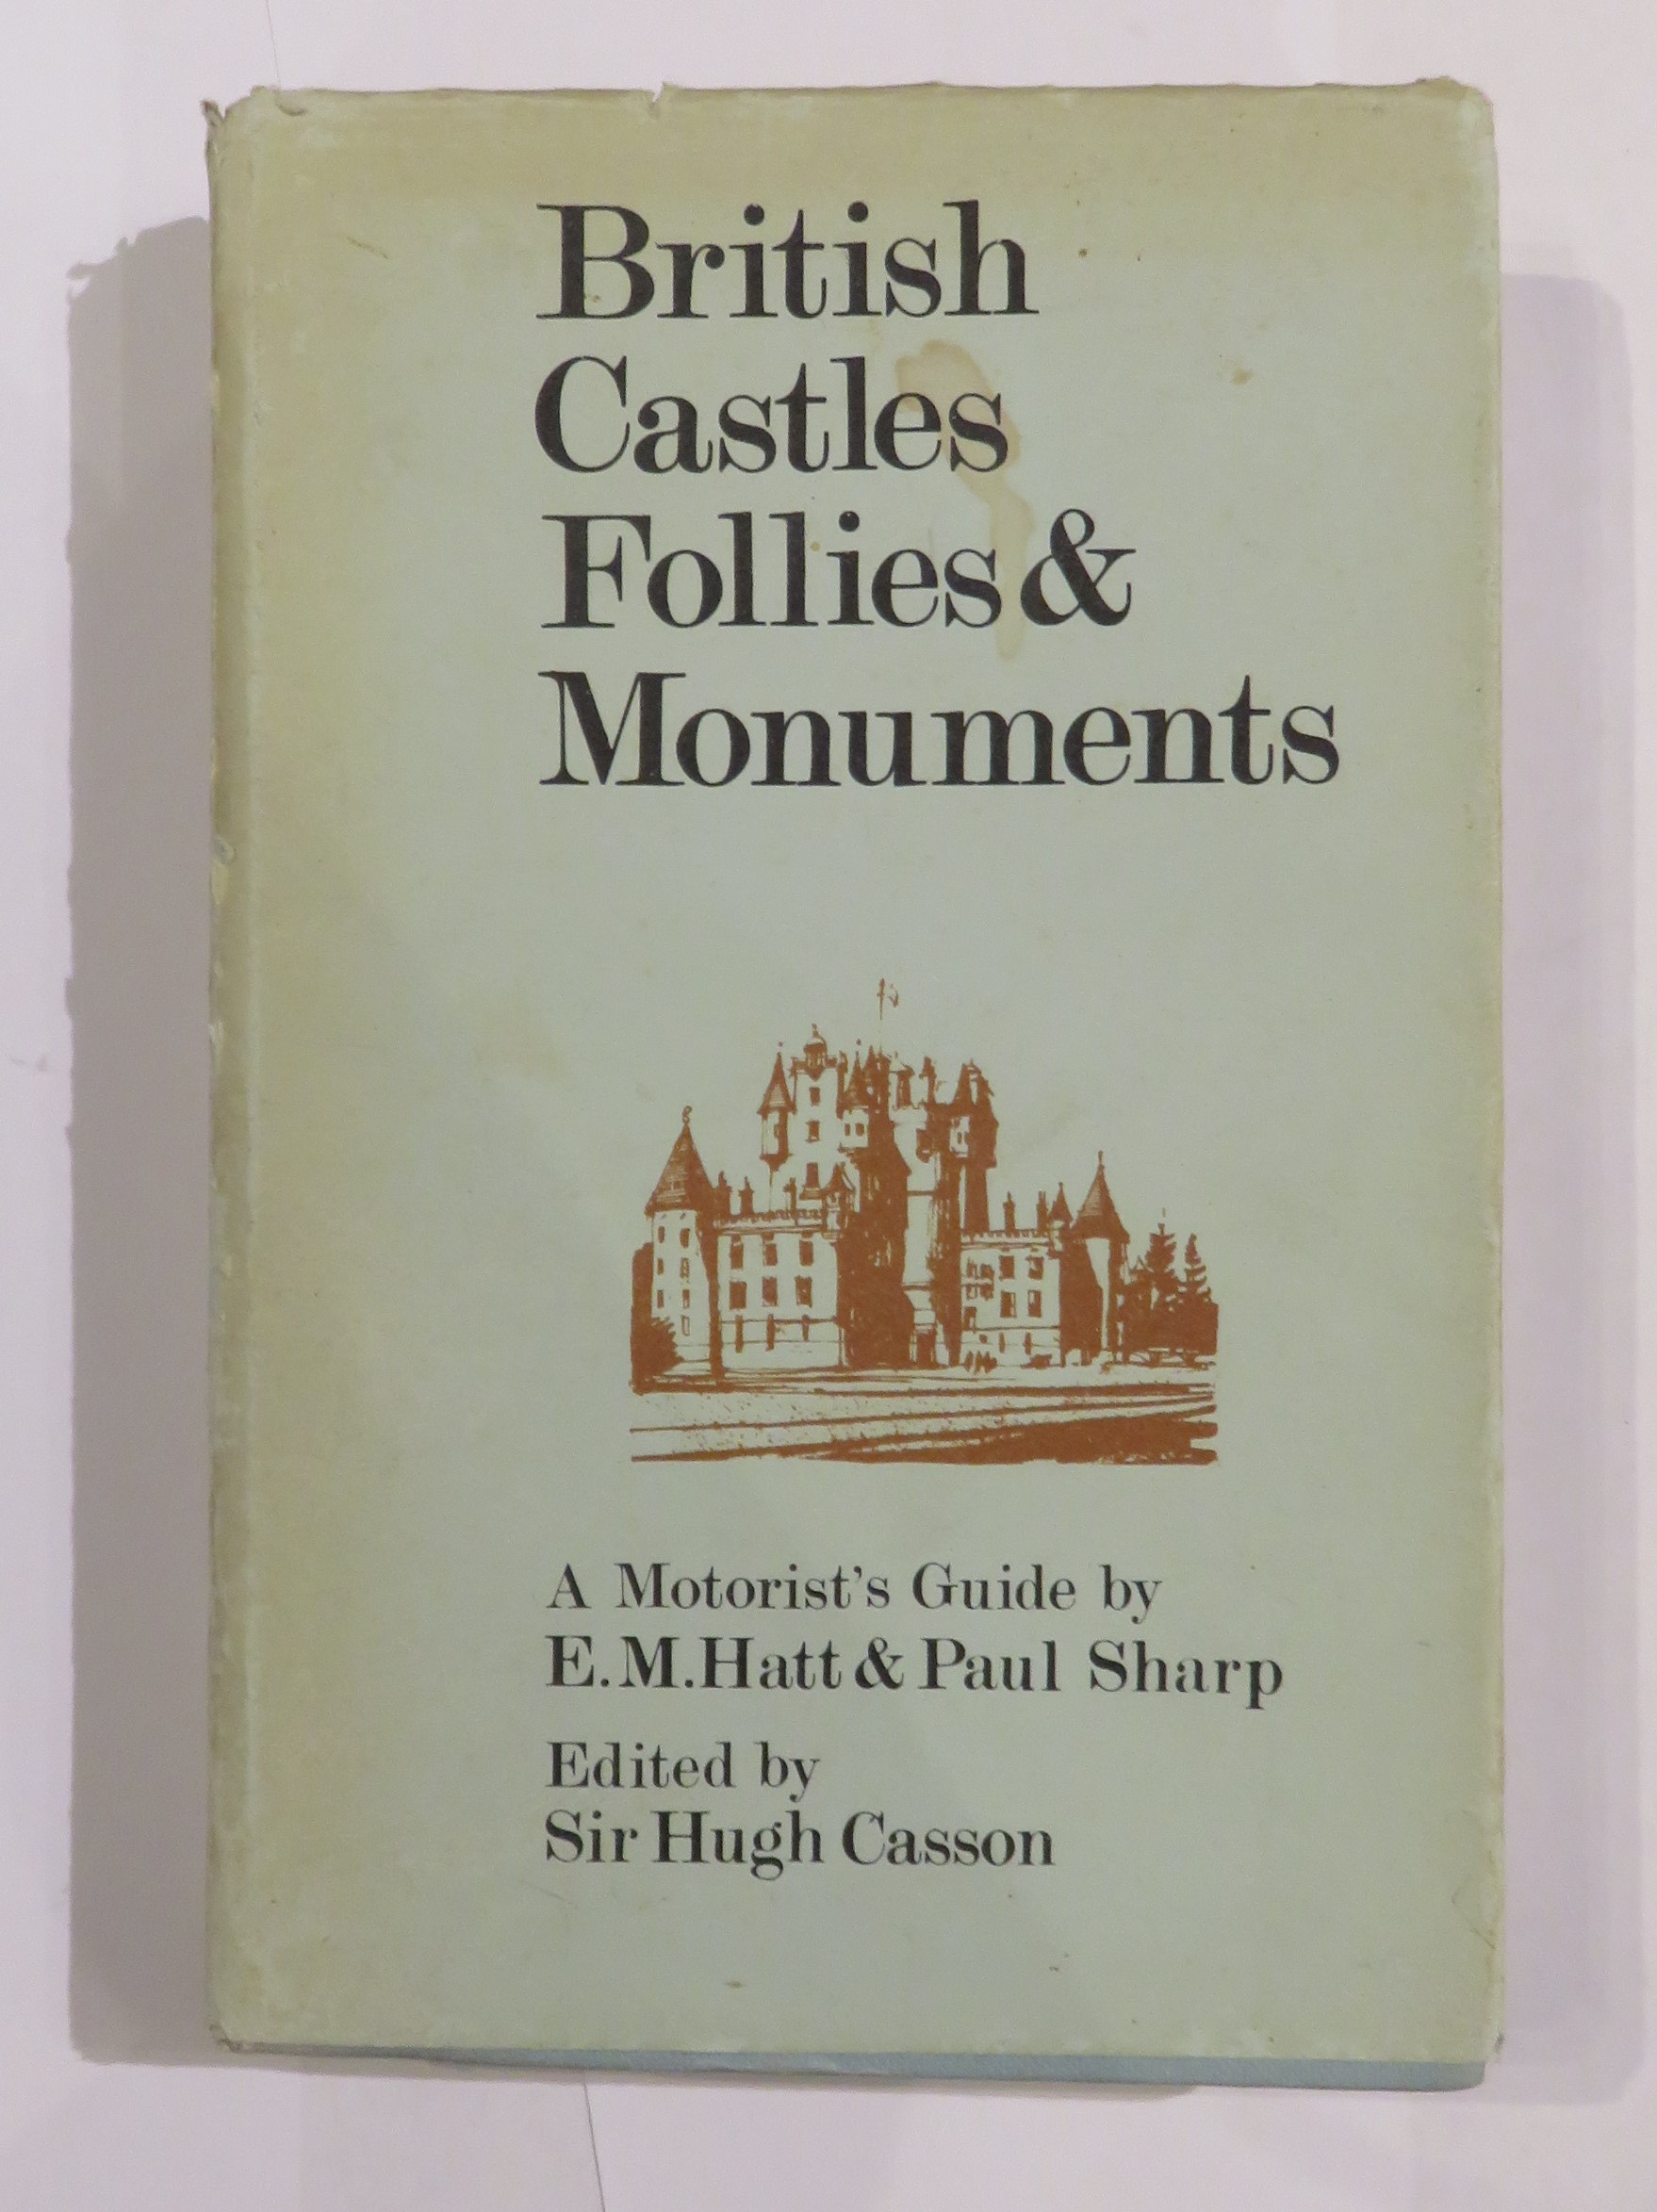 British Castles Follies and Monuments